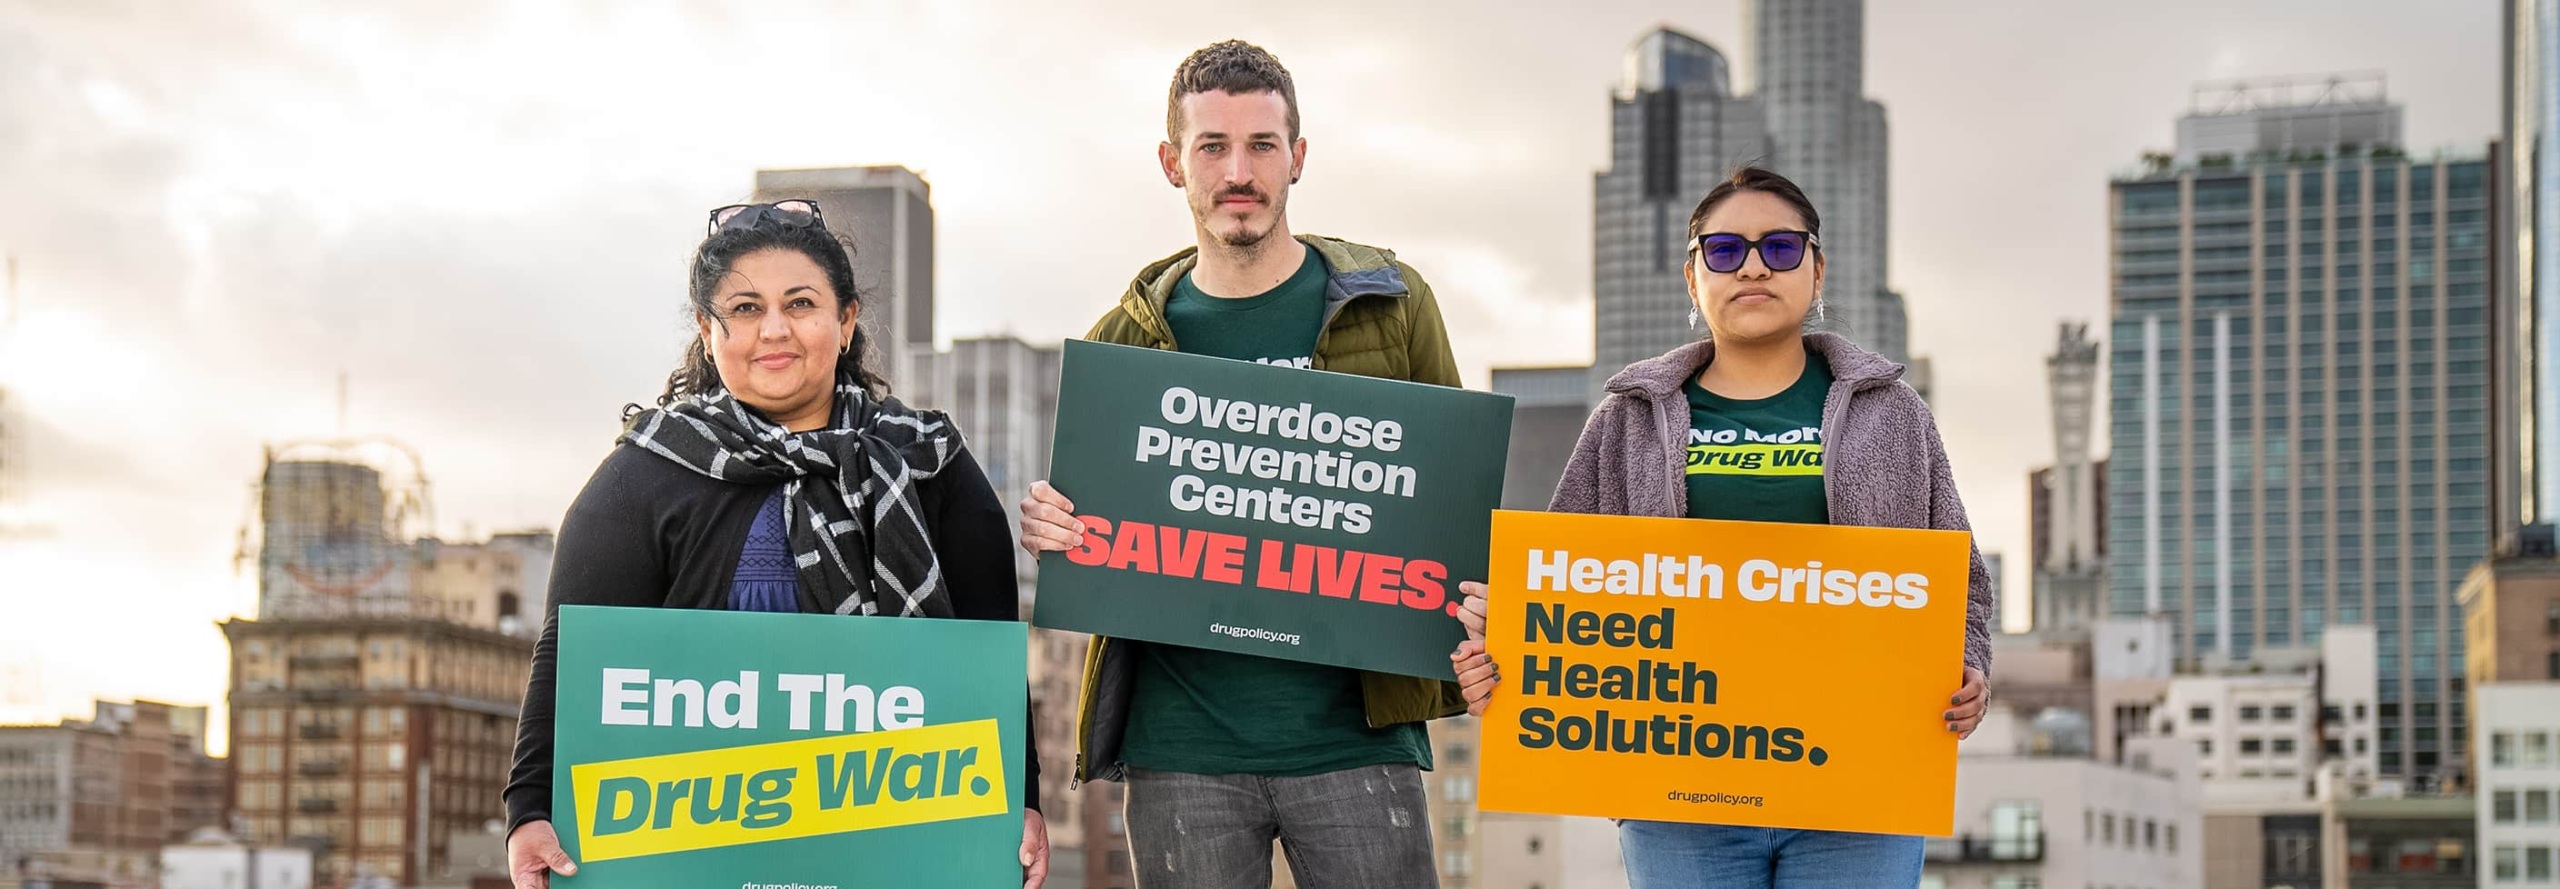 Three people stand in front of the LA cityscape holding signs reading "End the Drug War", "Overdose Prevention Centers Save Lives", and "Health Crises Need Health Solutions".